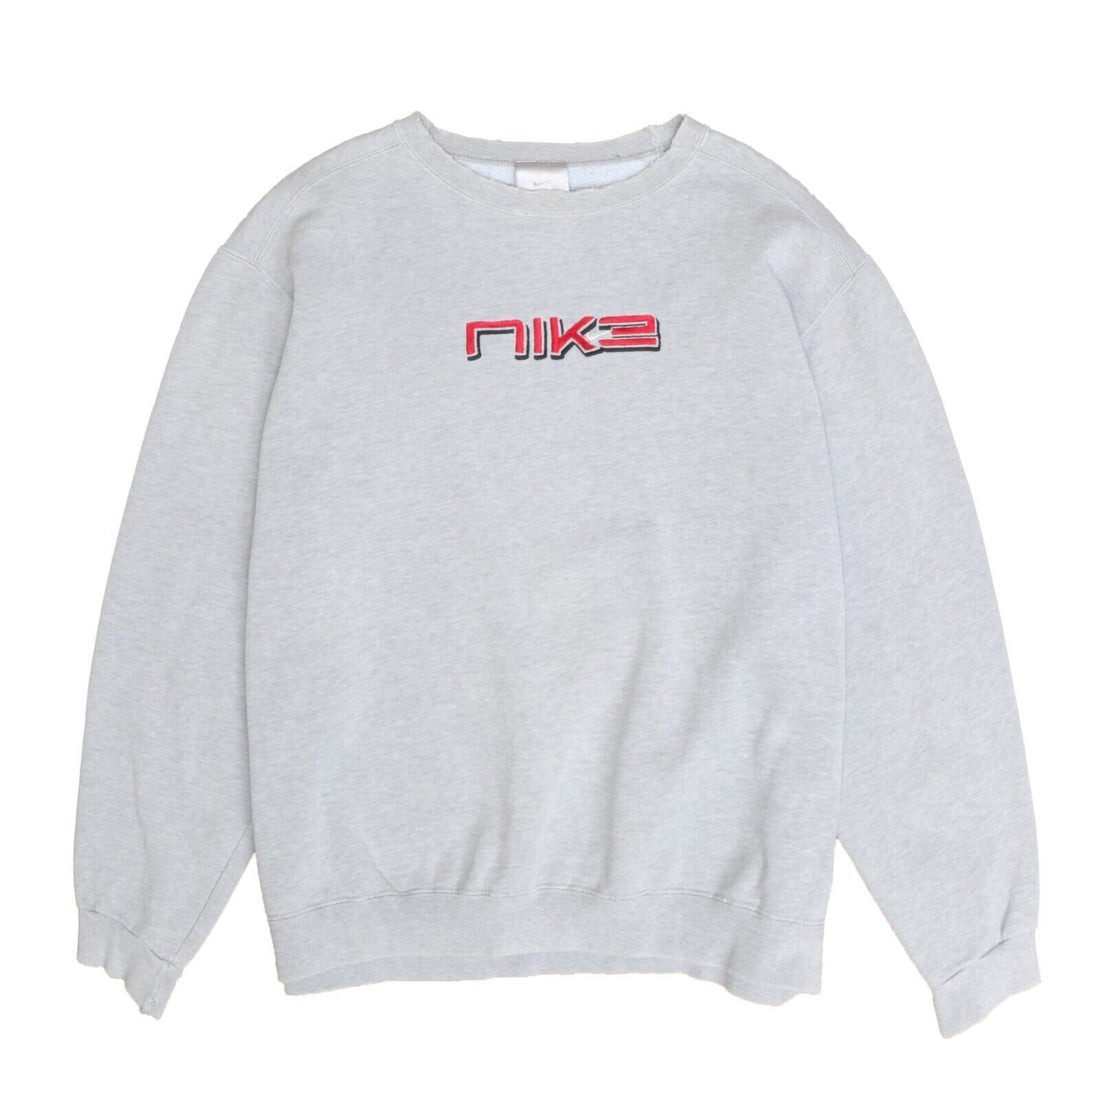 Vintage Nike Sweatshirt Crewneck Size Large Gray Spell Out Embroidered